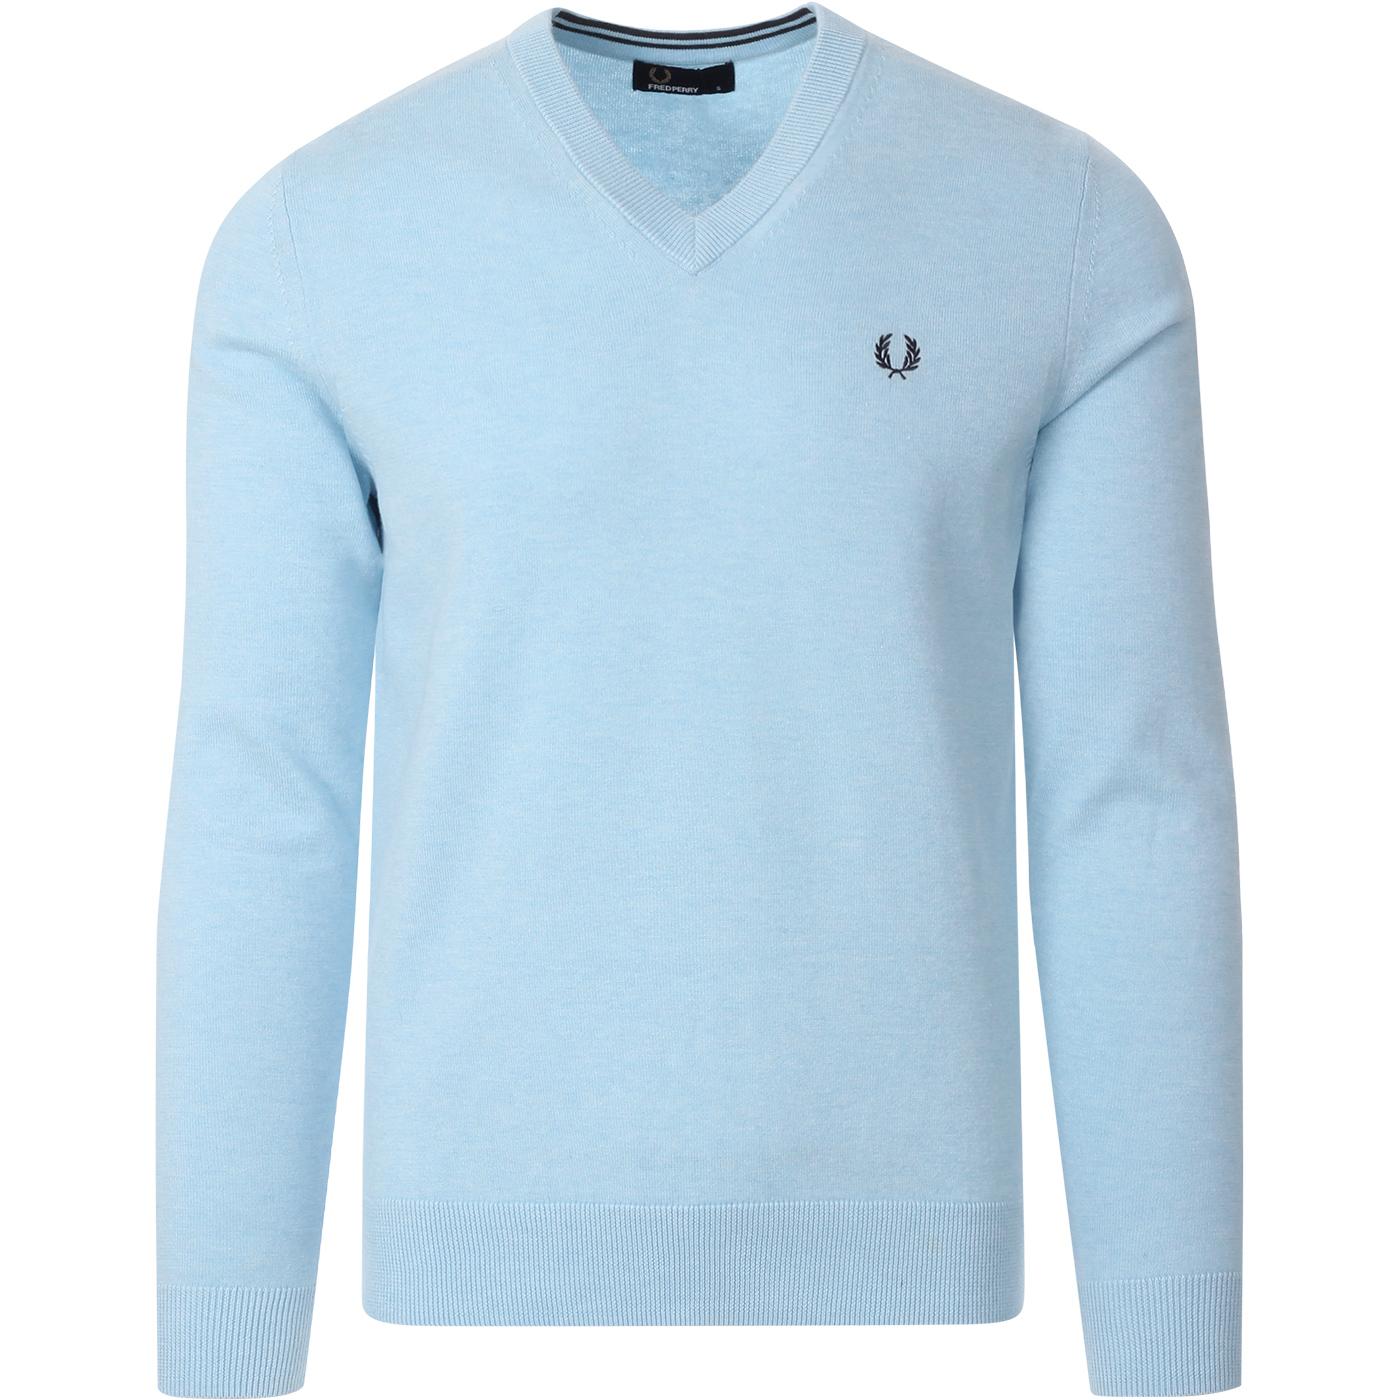 FRED PERRY Mod Classic Tipped V-Neck Jumper in Glacier